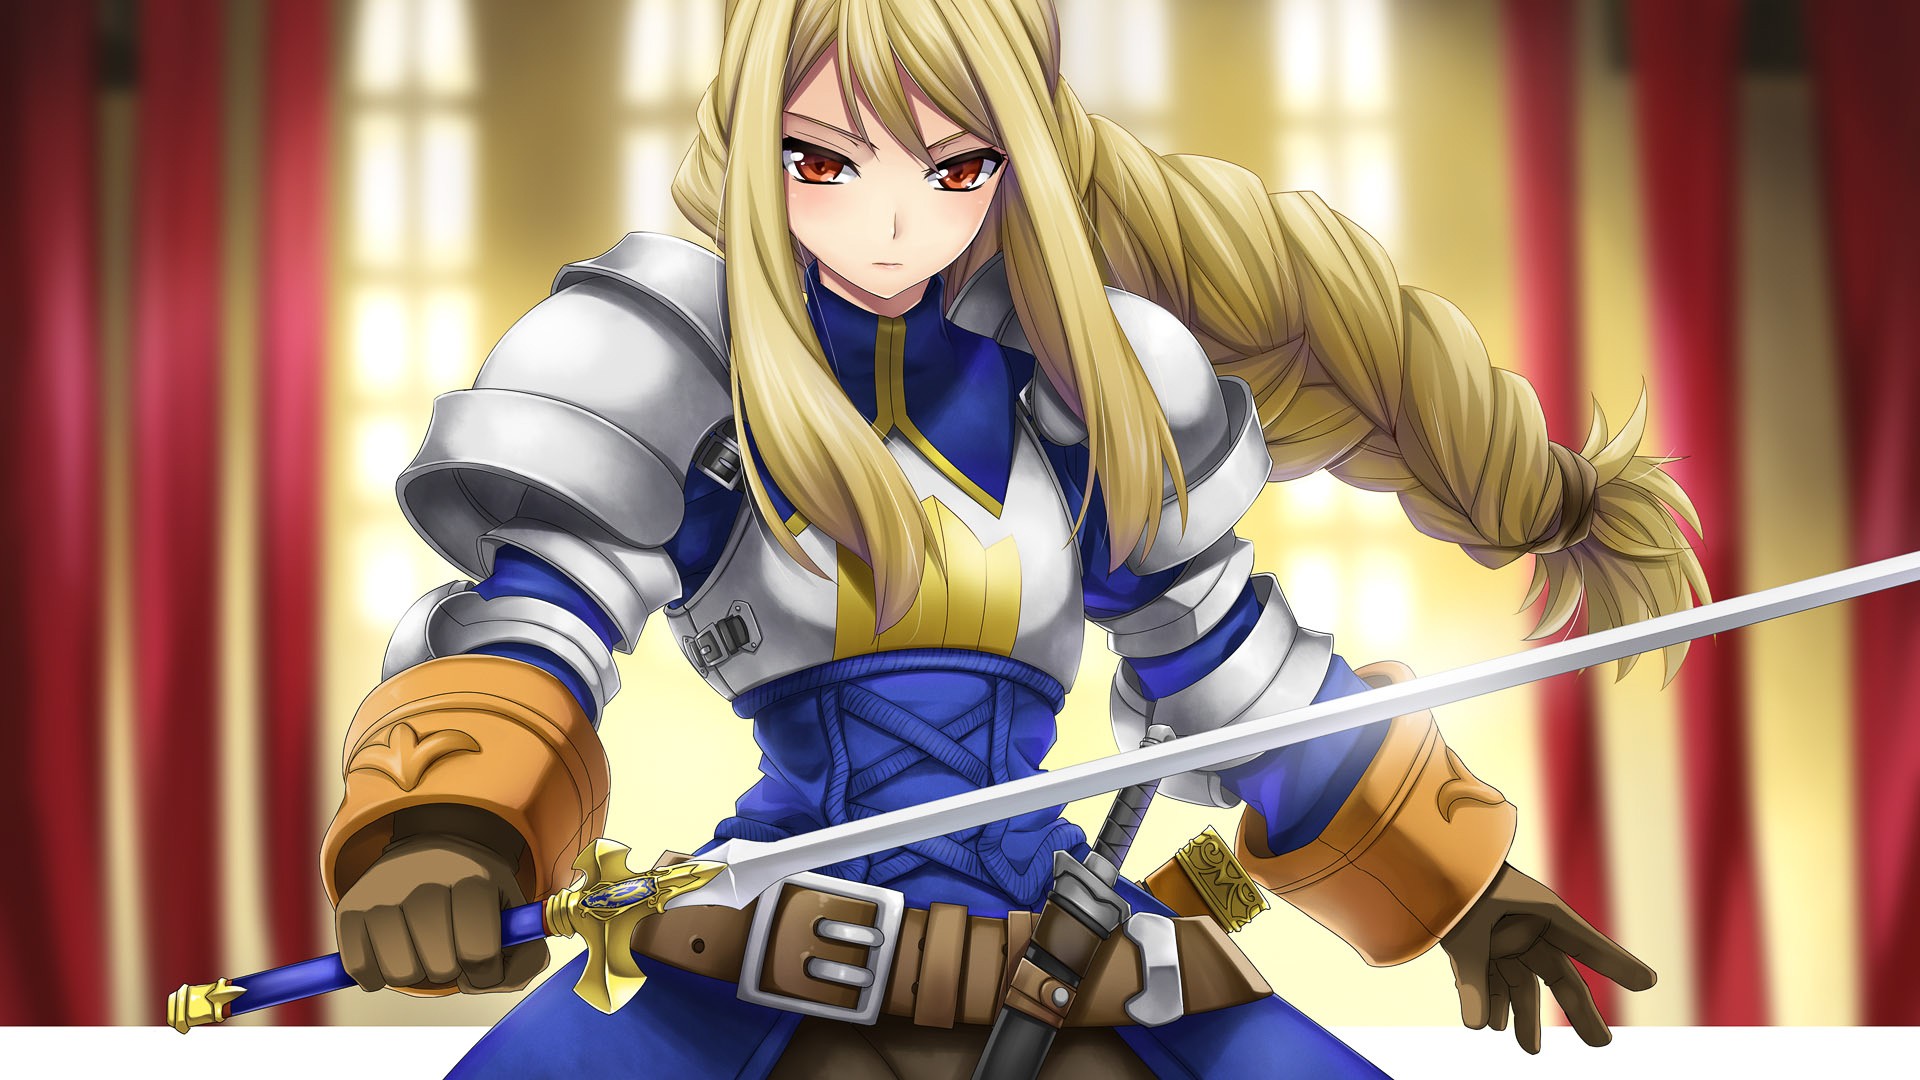 DreamShaper prompt: anime girl with sword and armor in - PromptHero